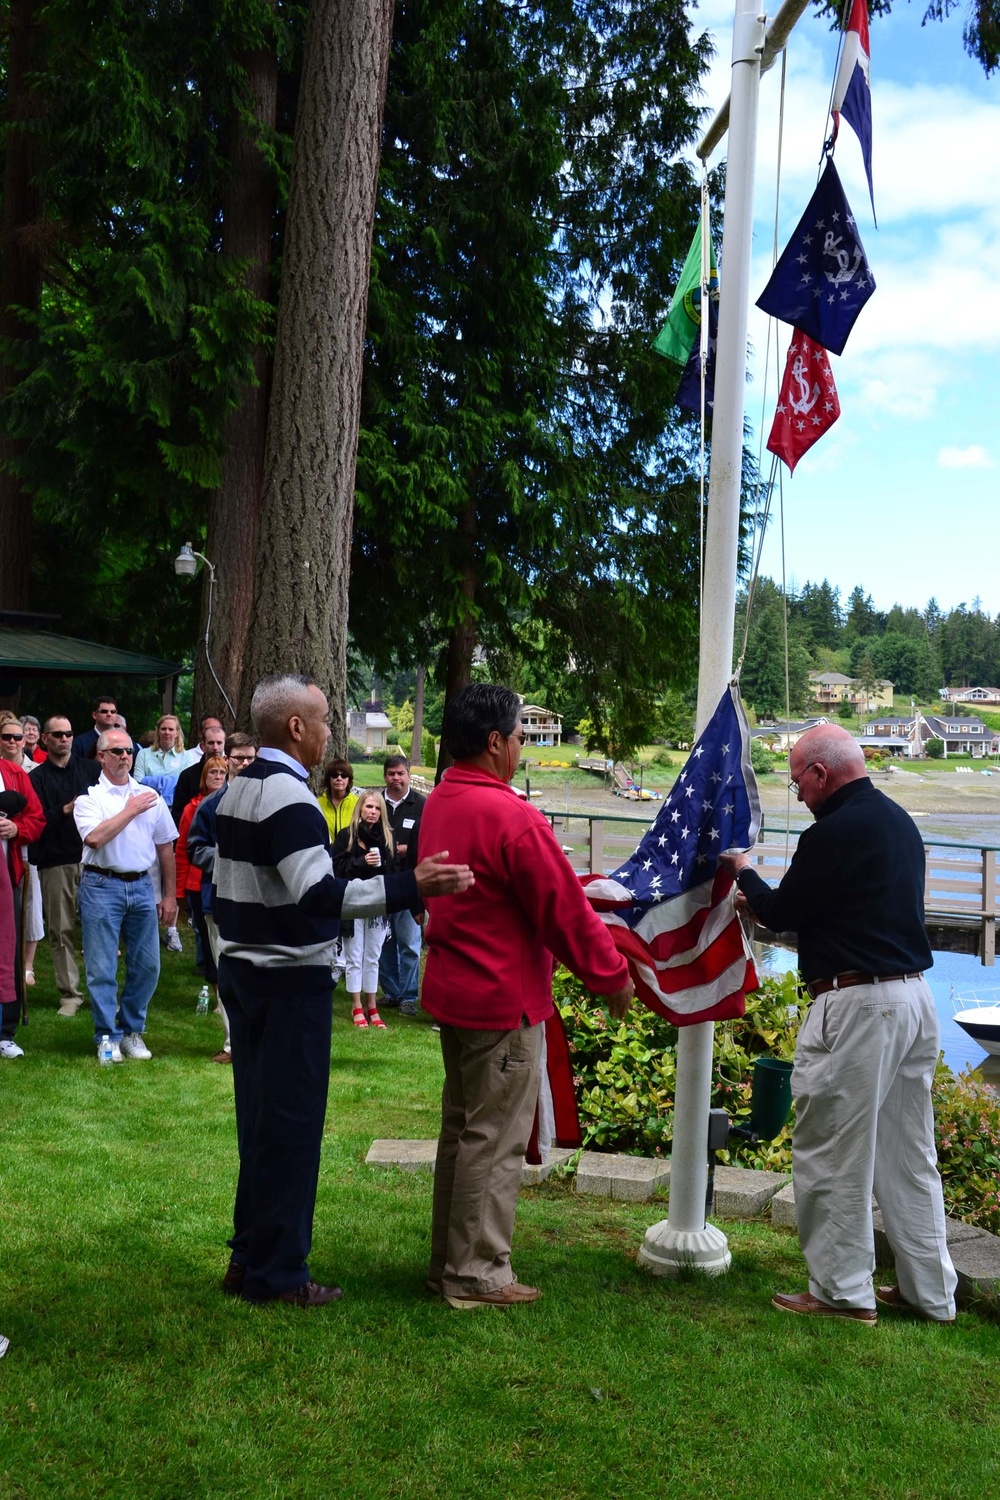 Raising of the American flag at the annual Evergreen Fleet Cruise 2011